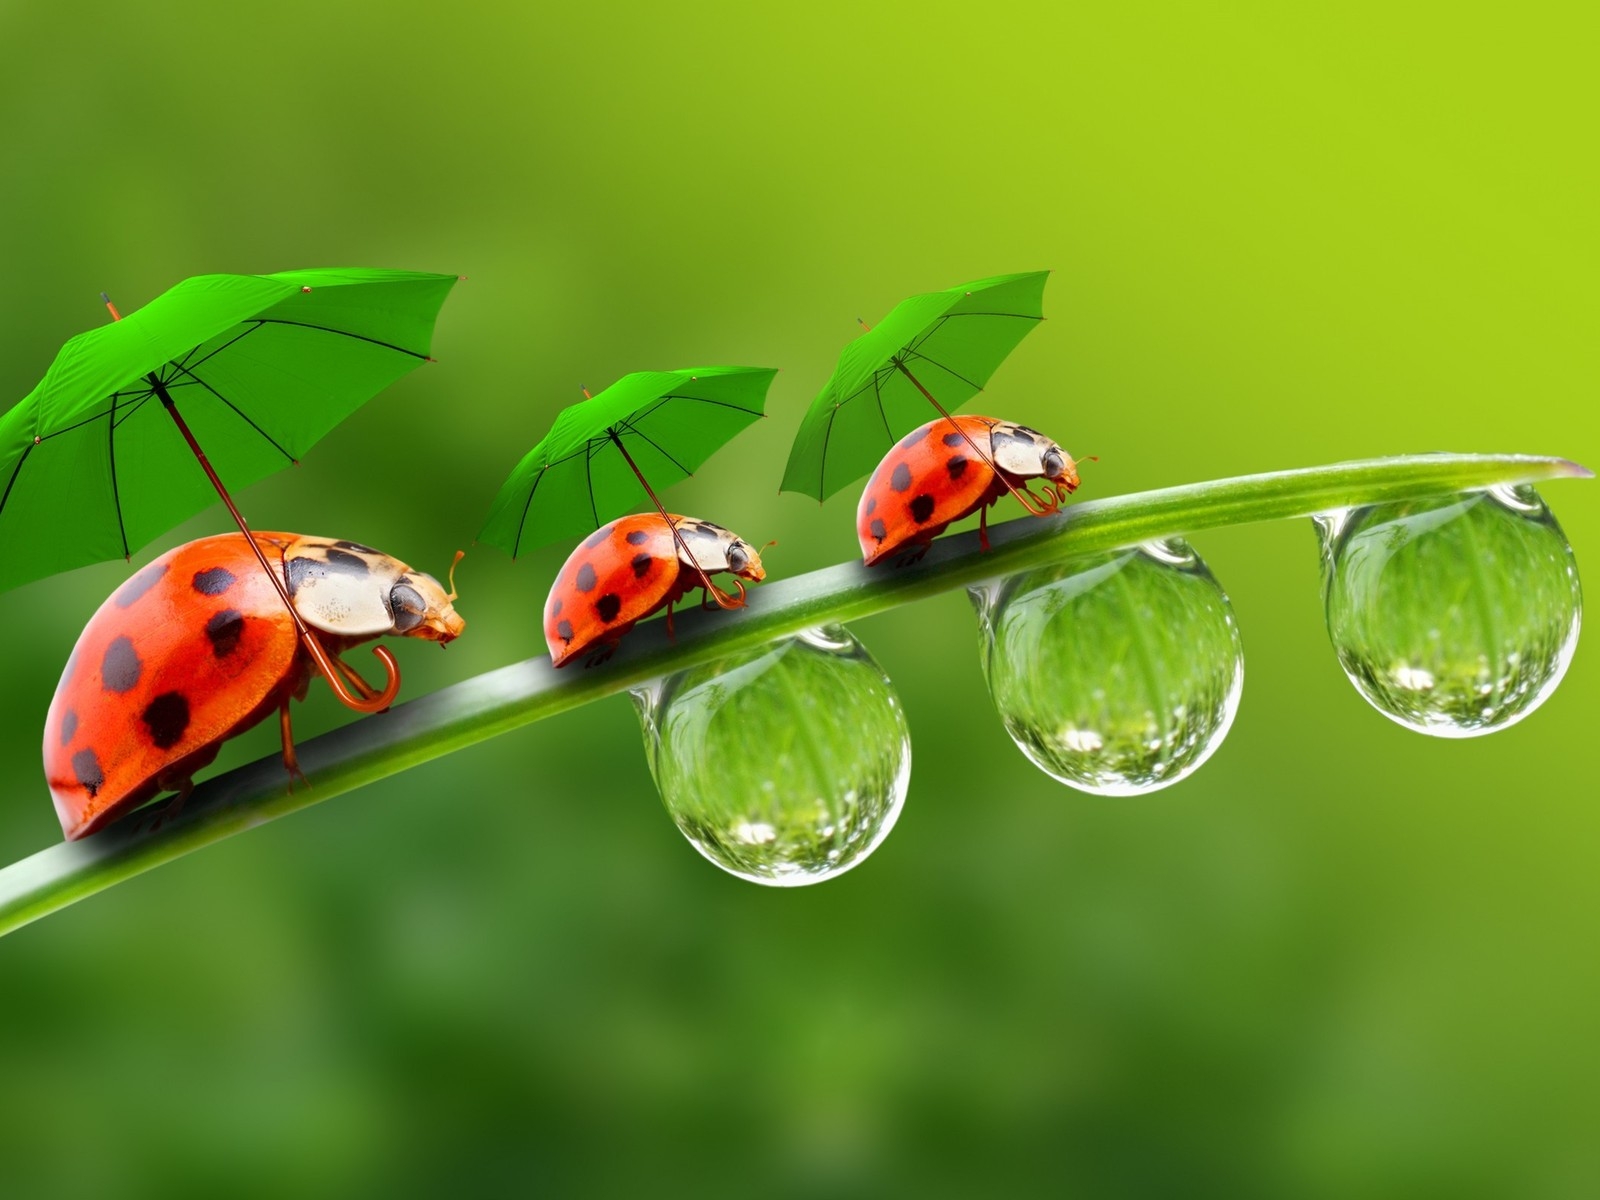 Ladybugs with Umbrellas for 1600 x 1200 resolution